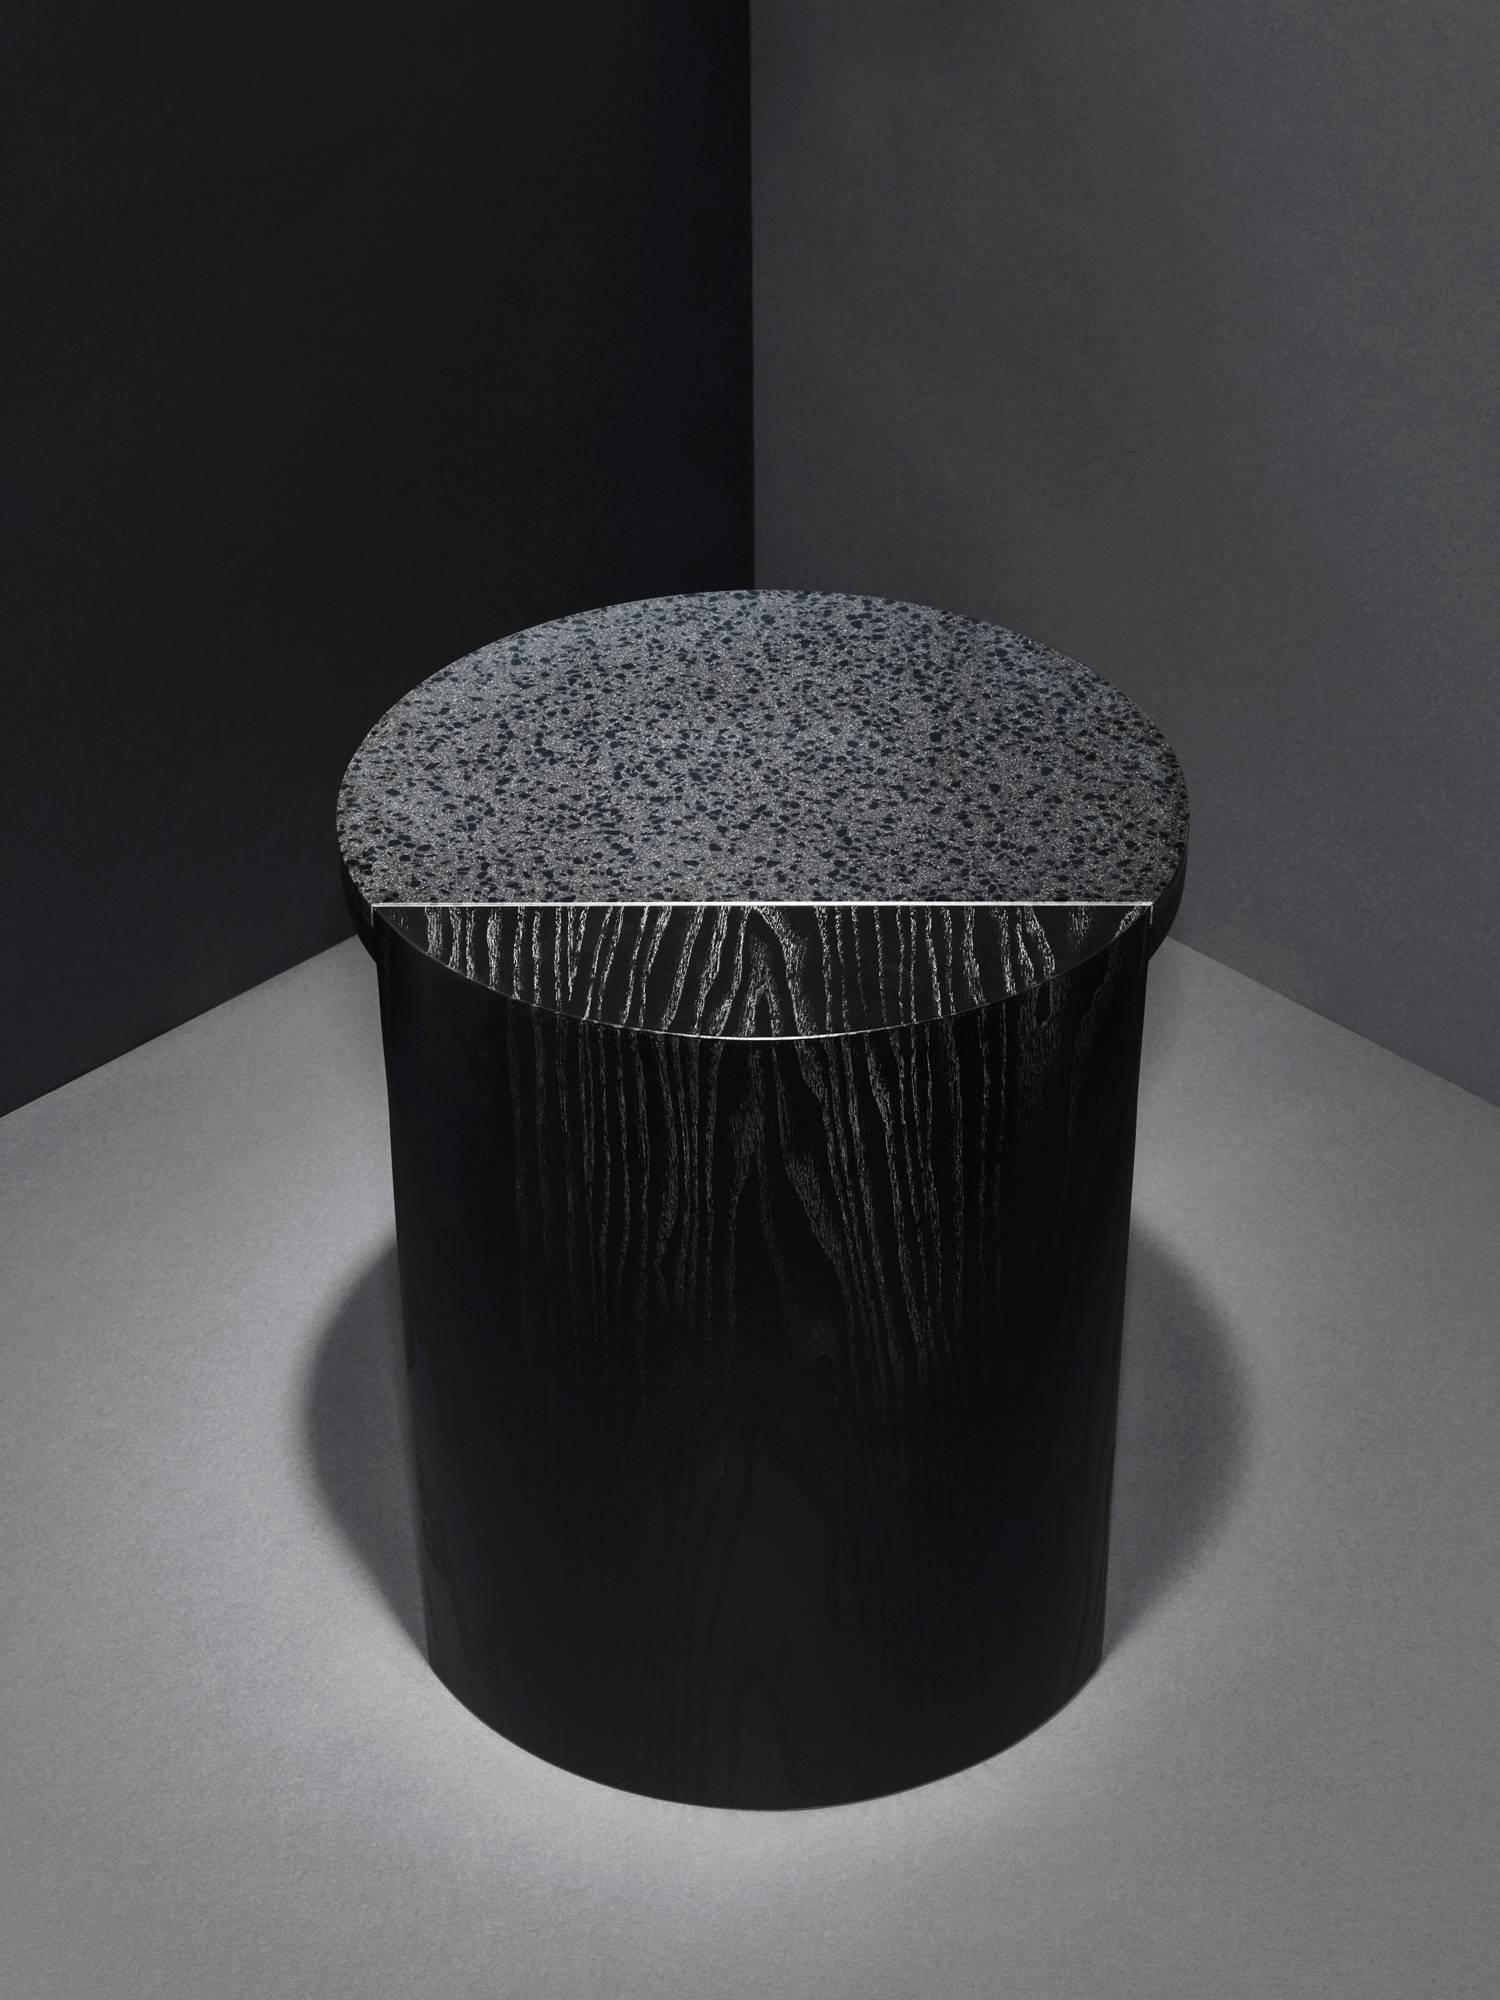 Gibbous Black Lava Side Table by Robert Sukrachand, Made in USA (Sonstiges) im Angebot